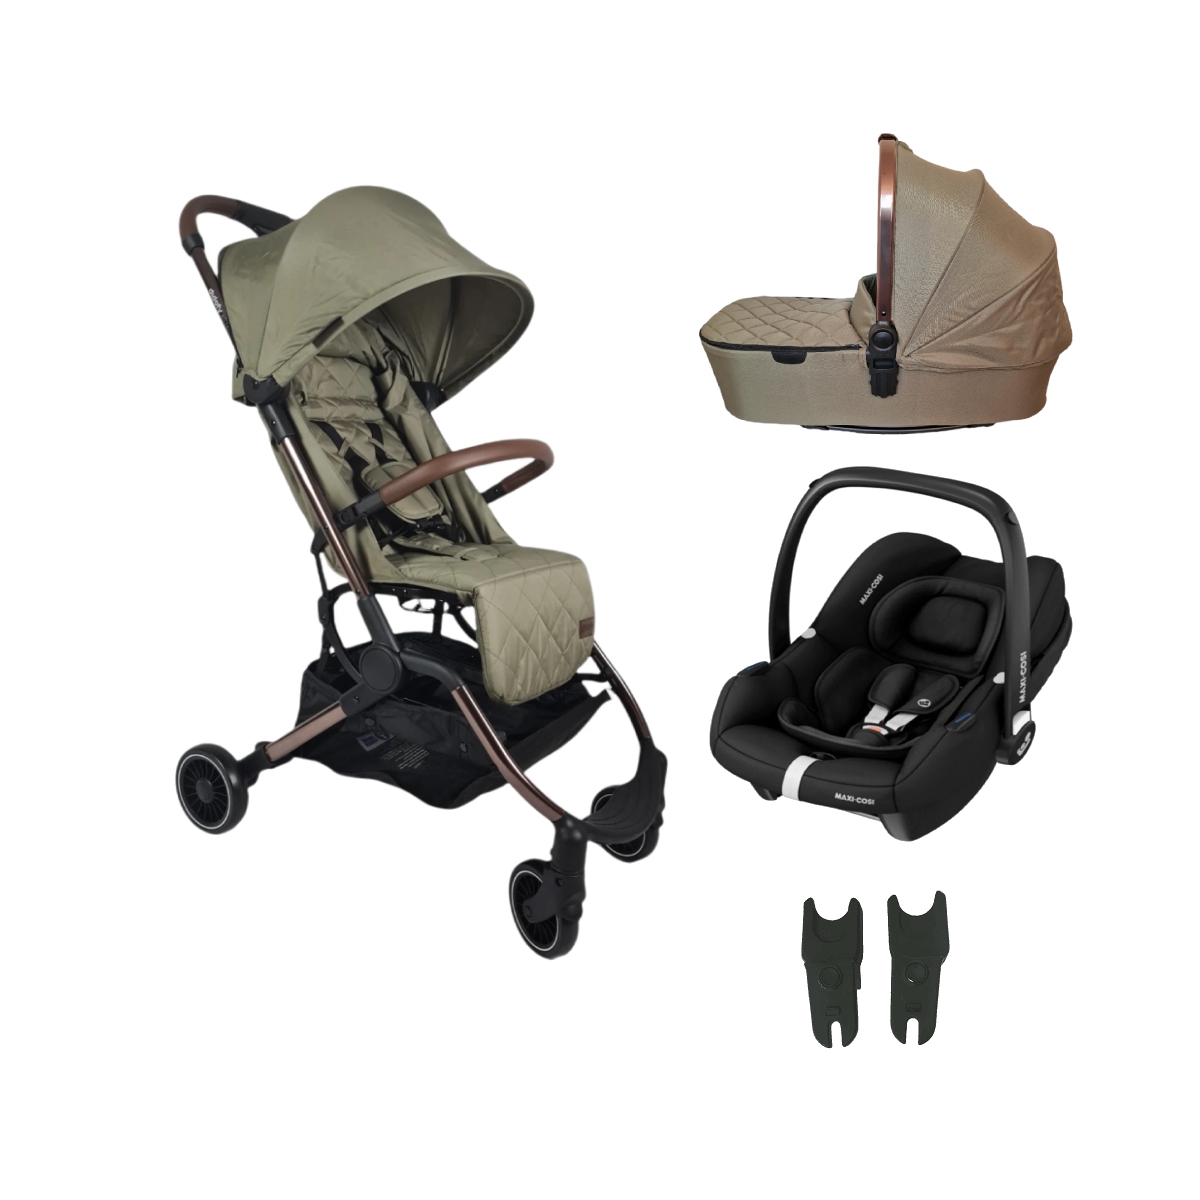 Didofy Aster 2 3in1 Travel System